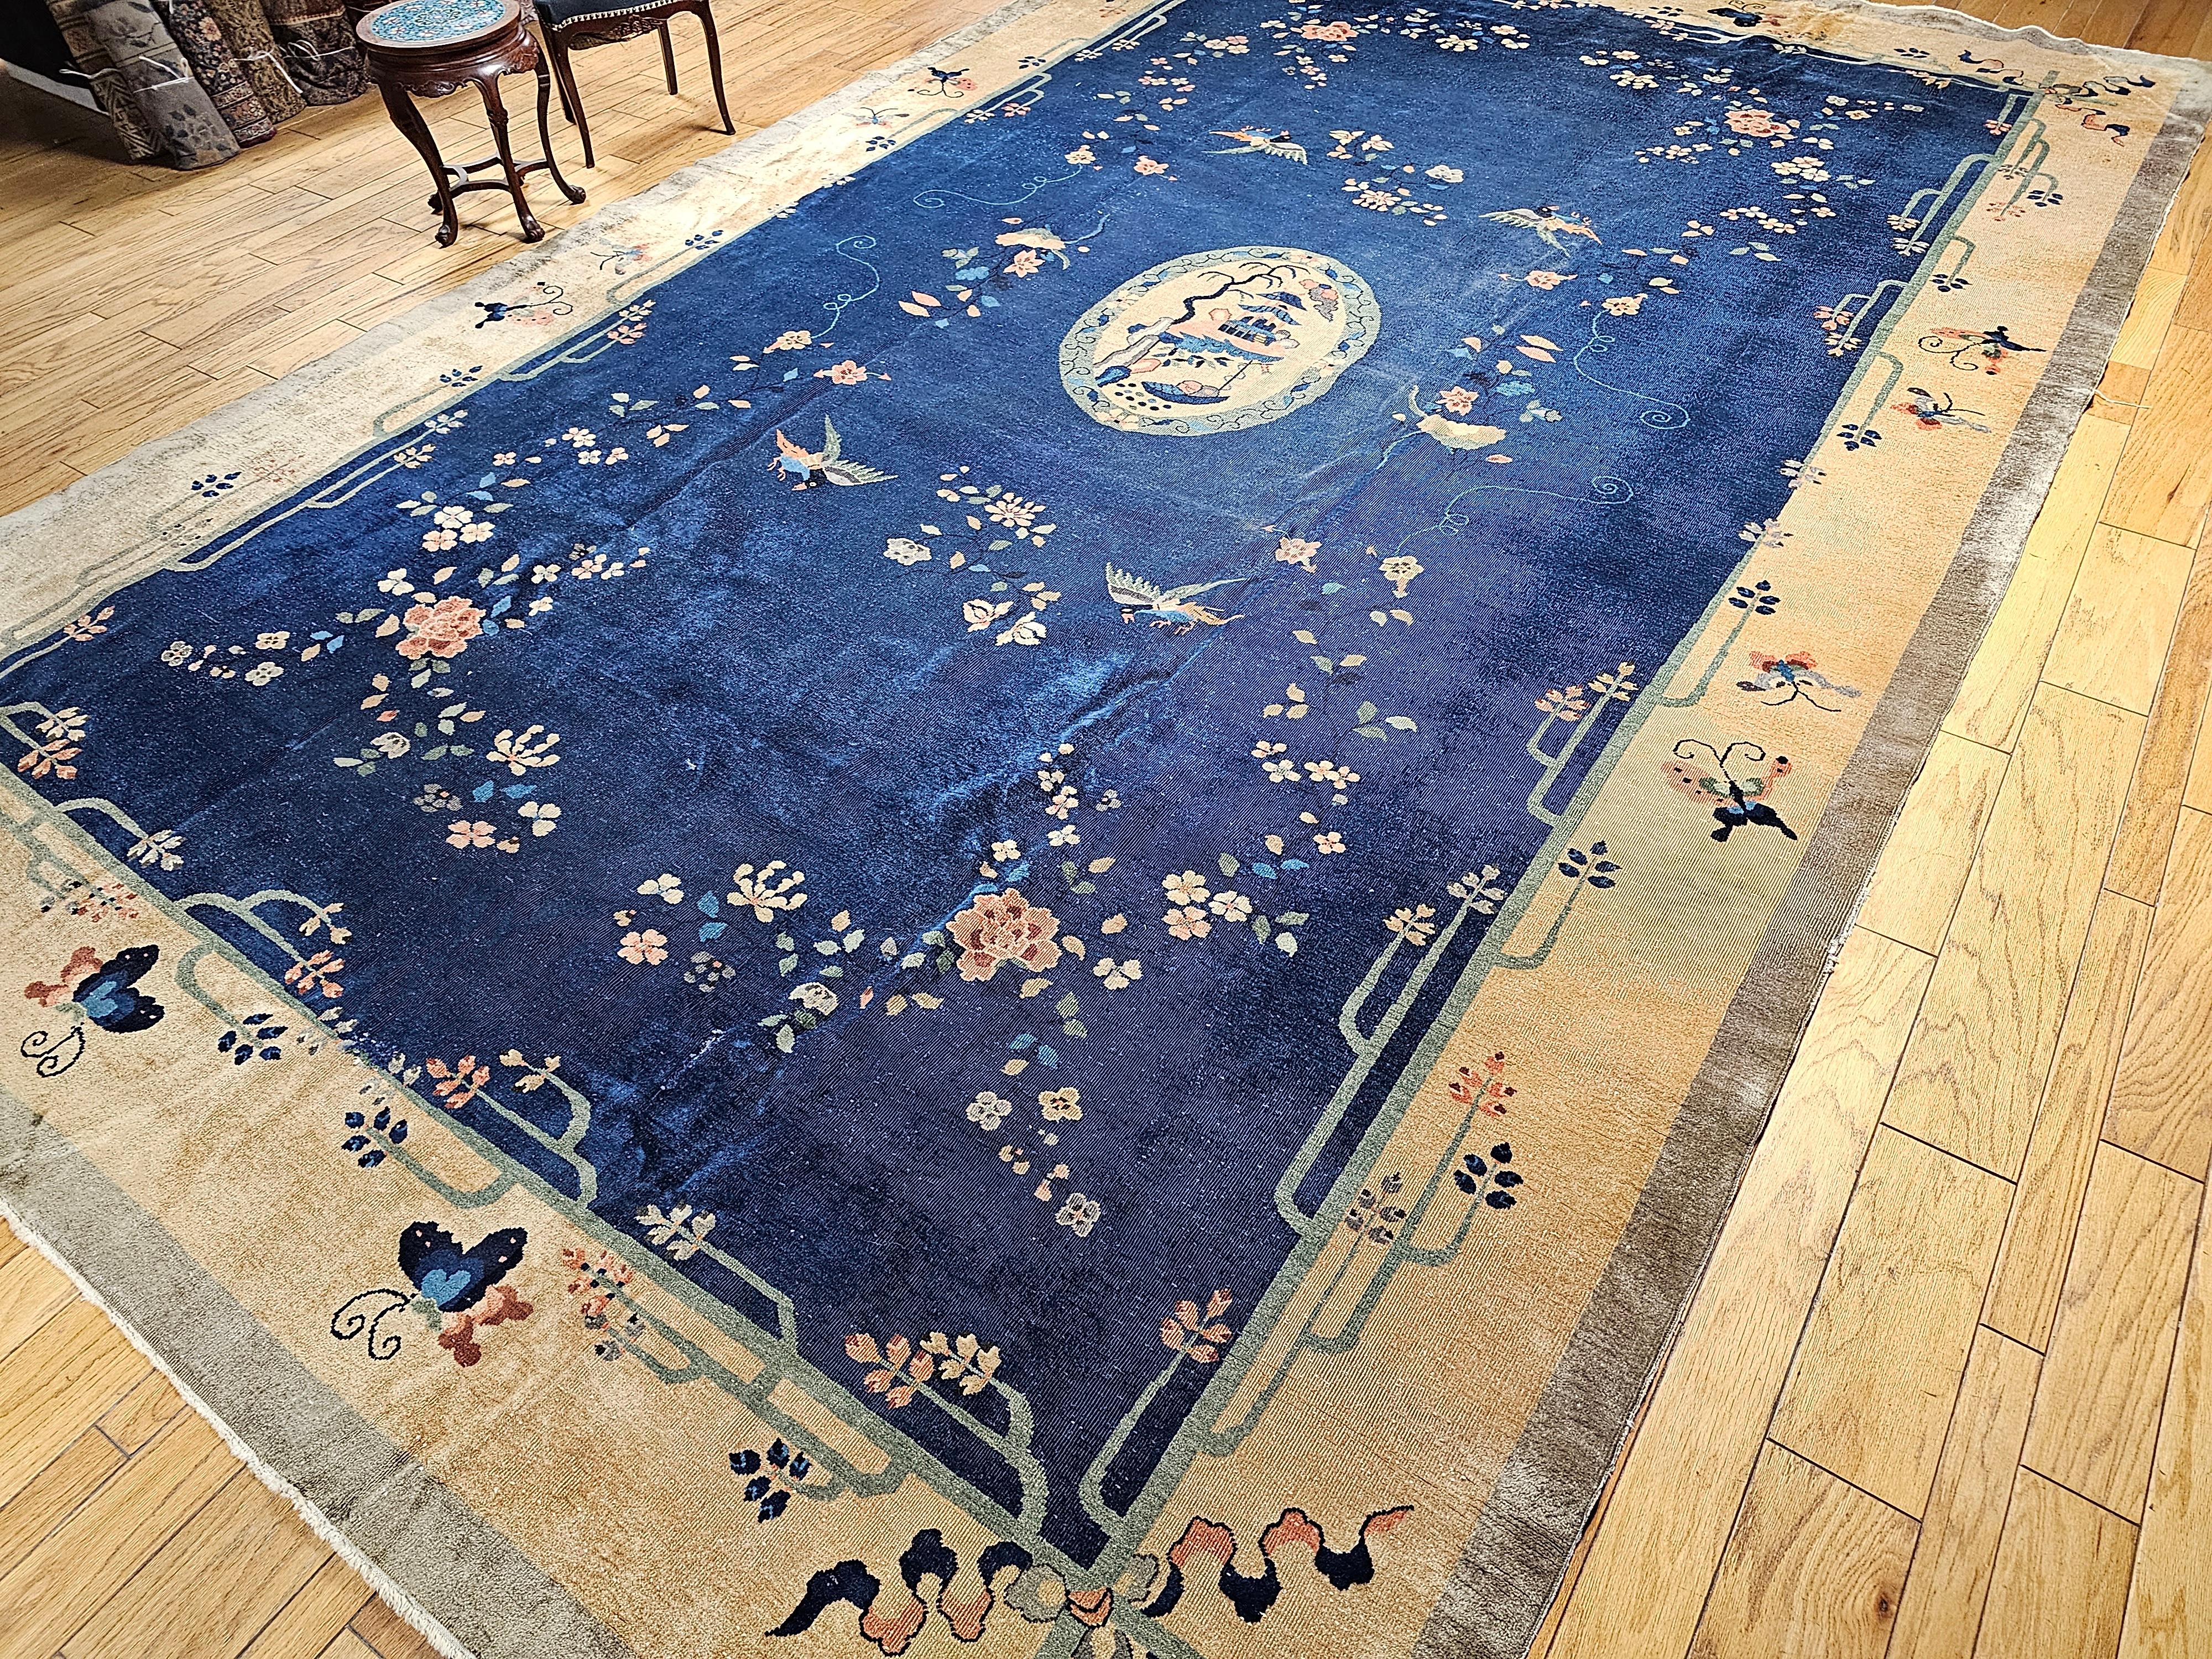 Vintage Oversized Chinese Art Deco with Pagoda, Birds Design in French Blue, Tan For Sale 8